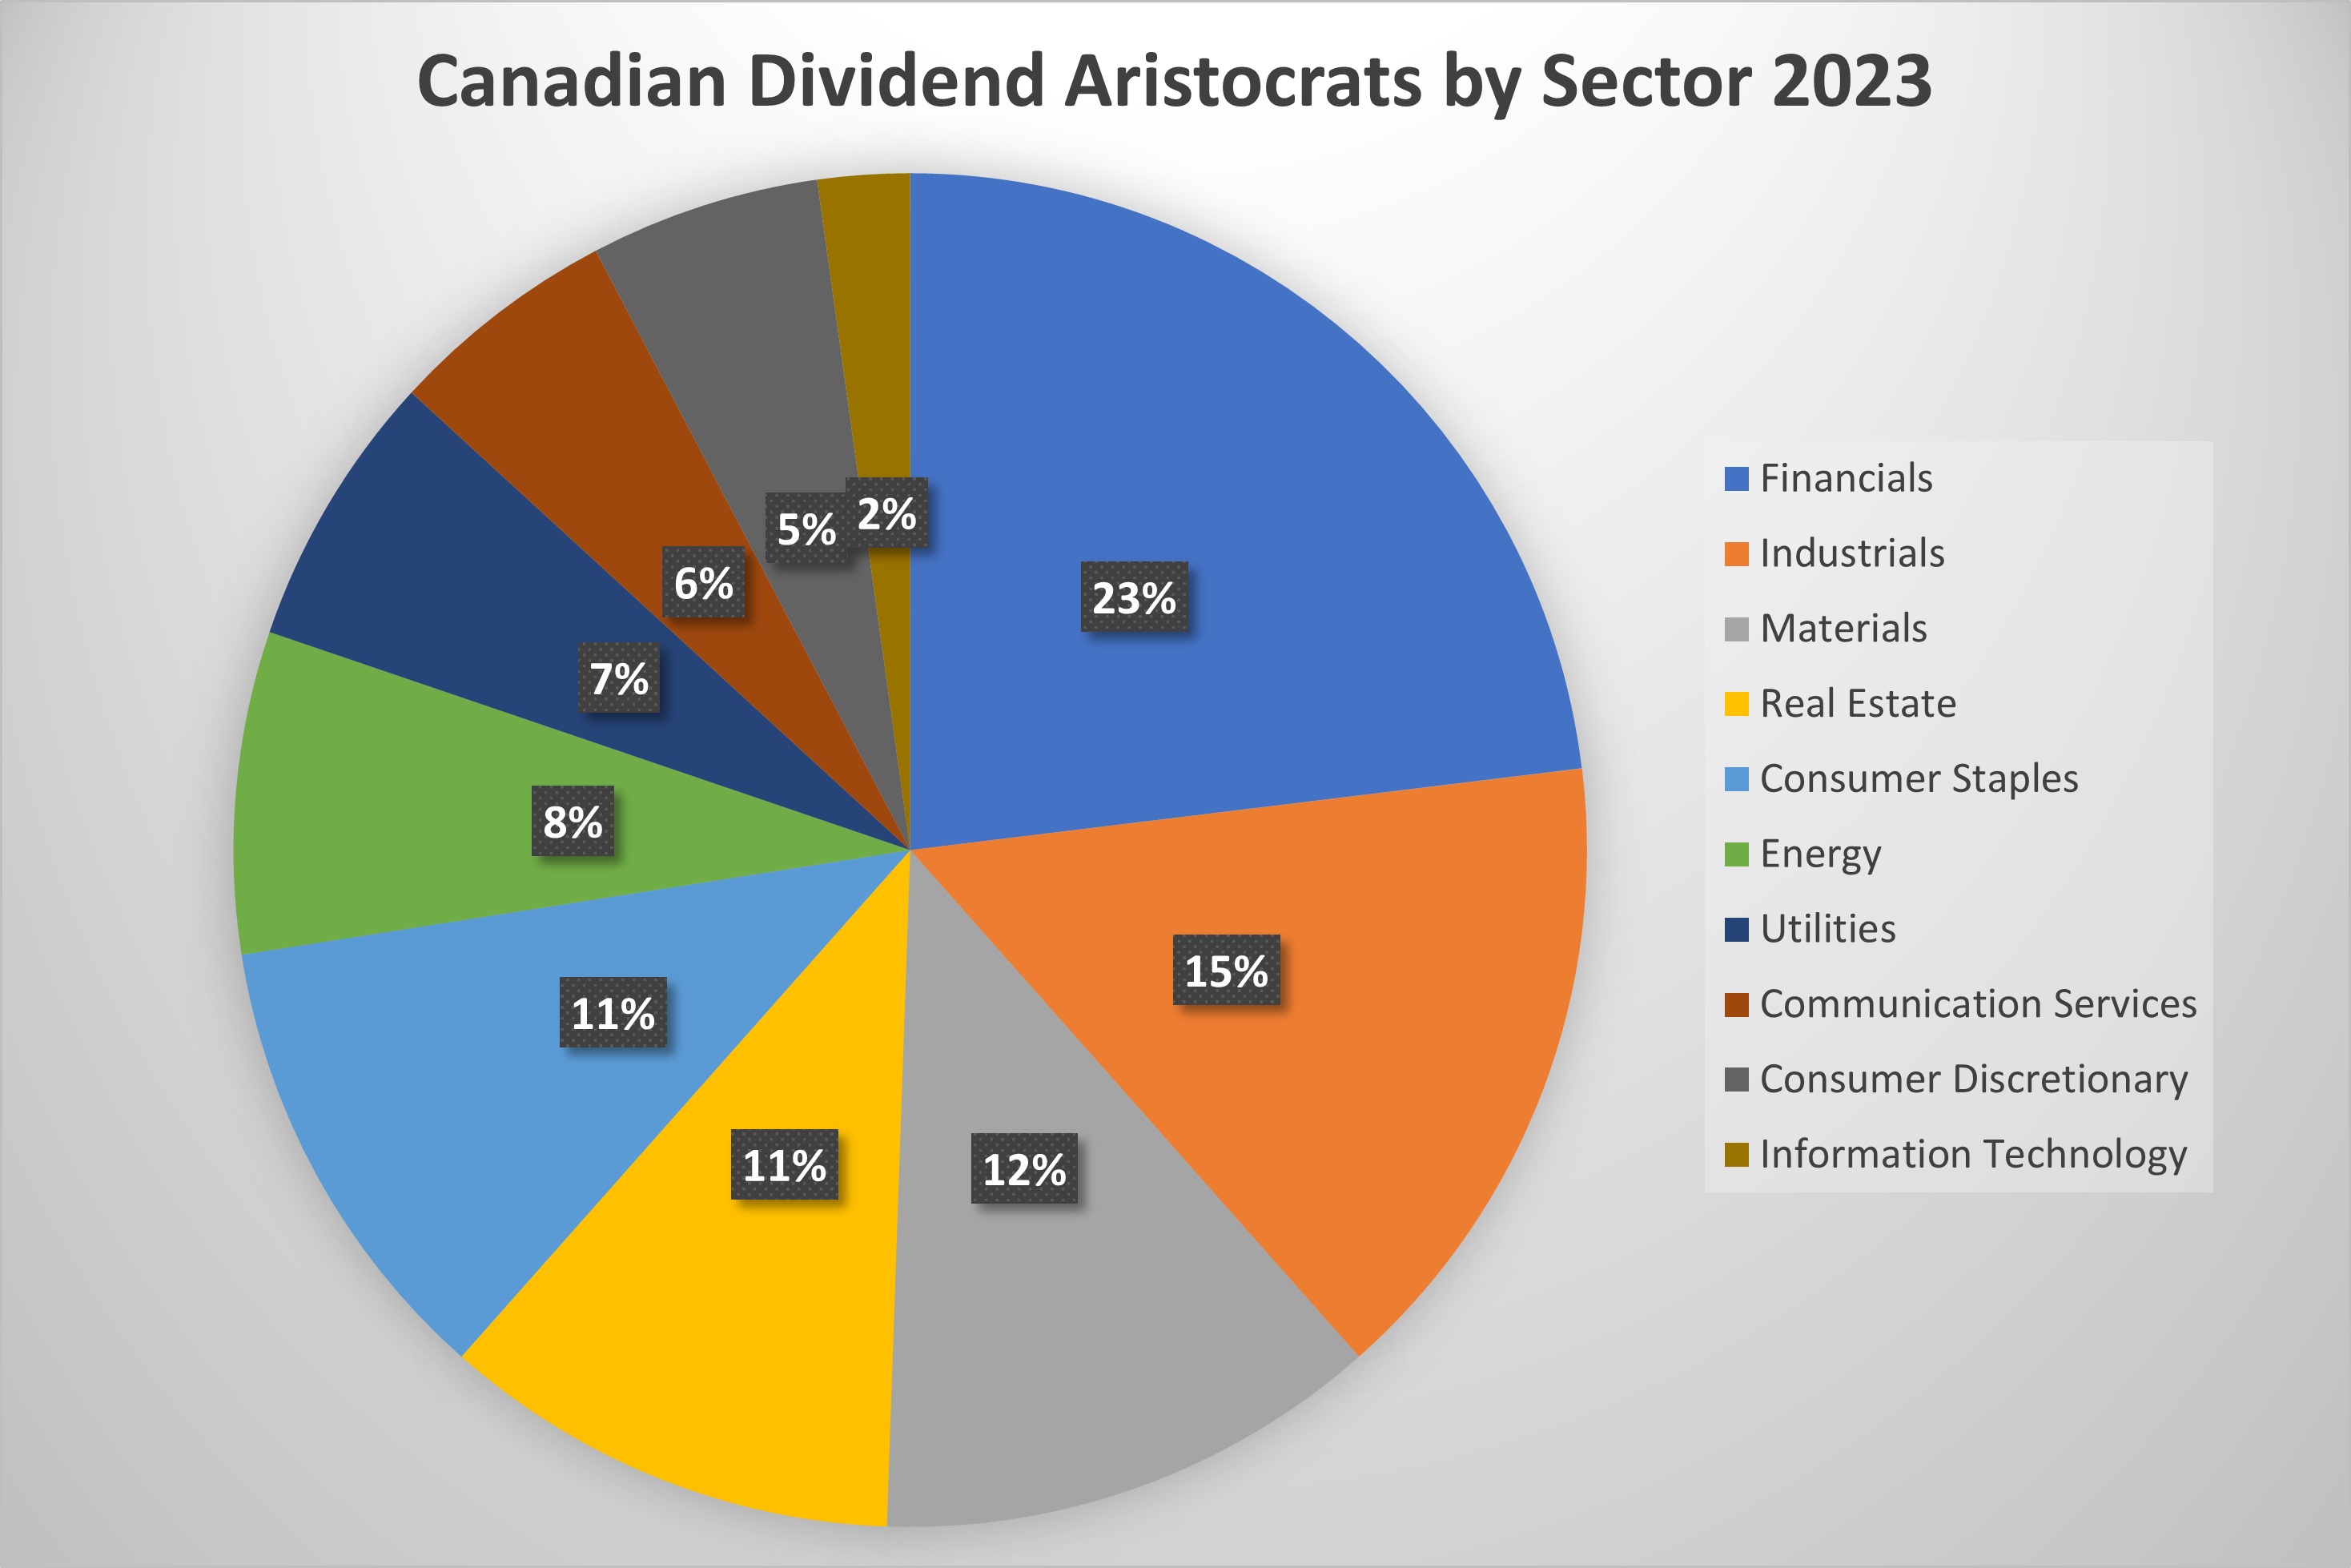 Canadian Dividend Aristocrats by sector in 2023